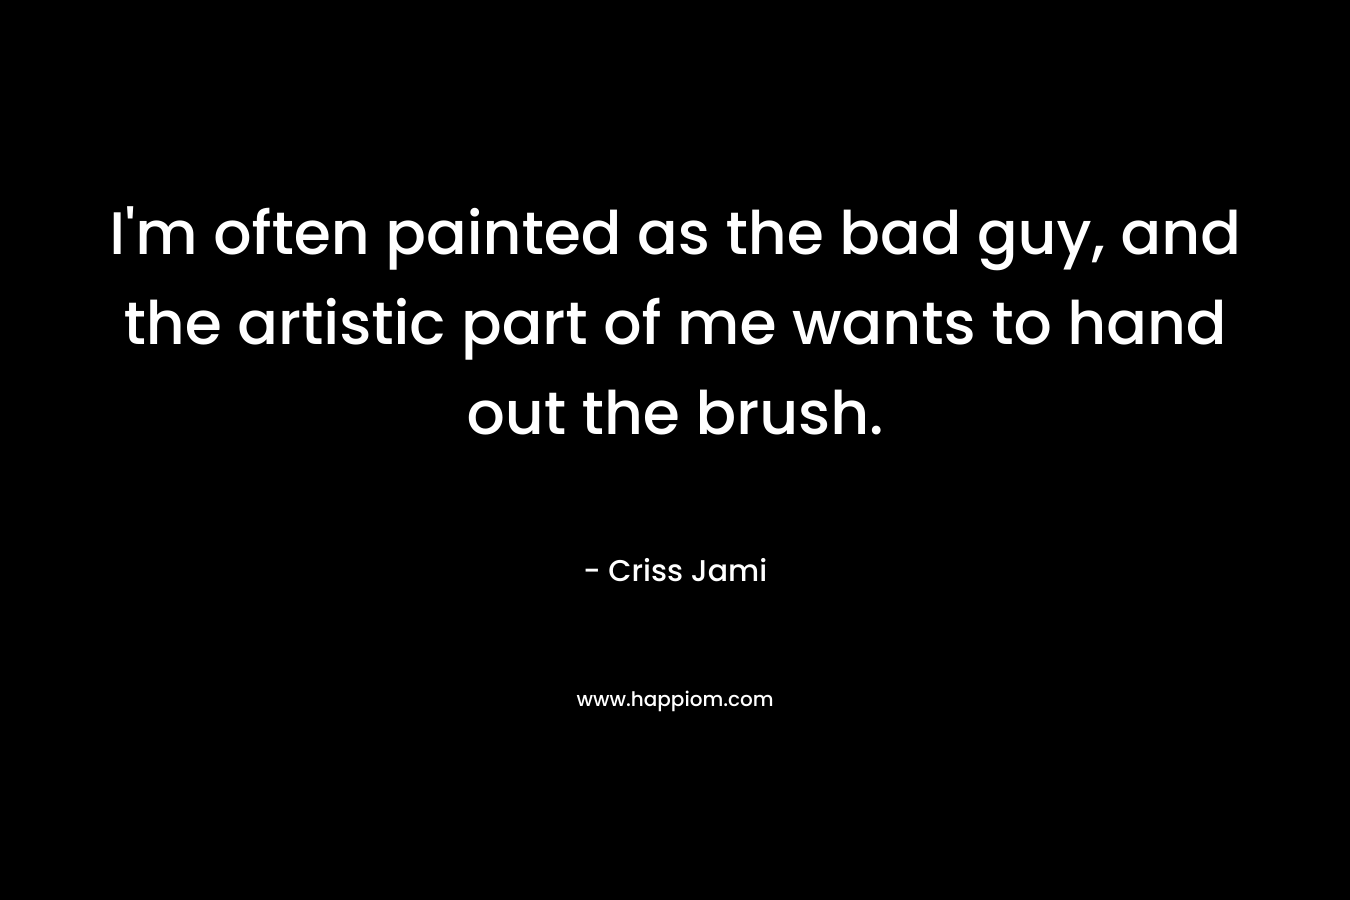 I'm often painted as the bad guy, and the artistic part of me wants to hand out the brush.